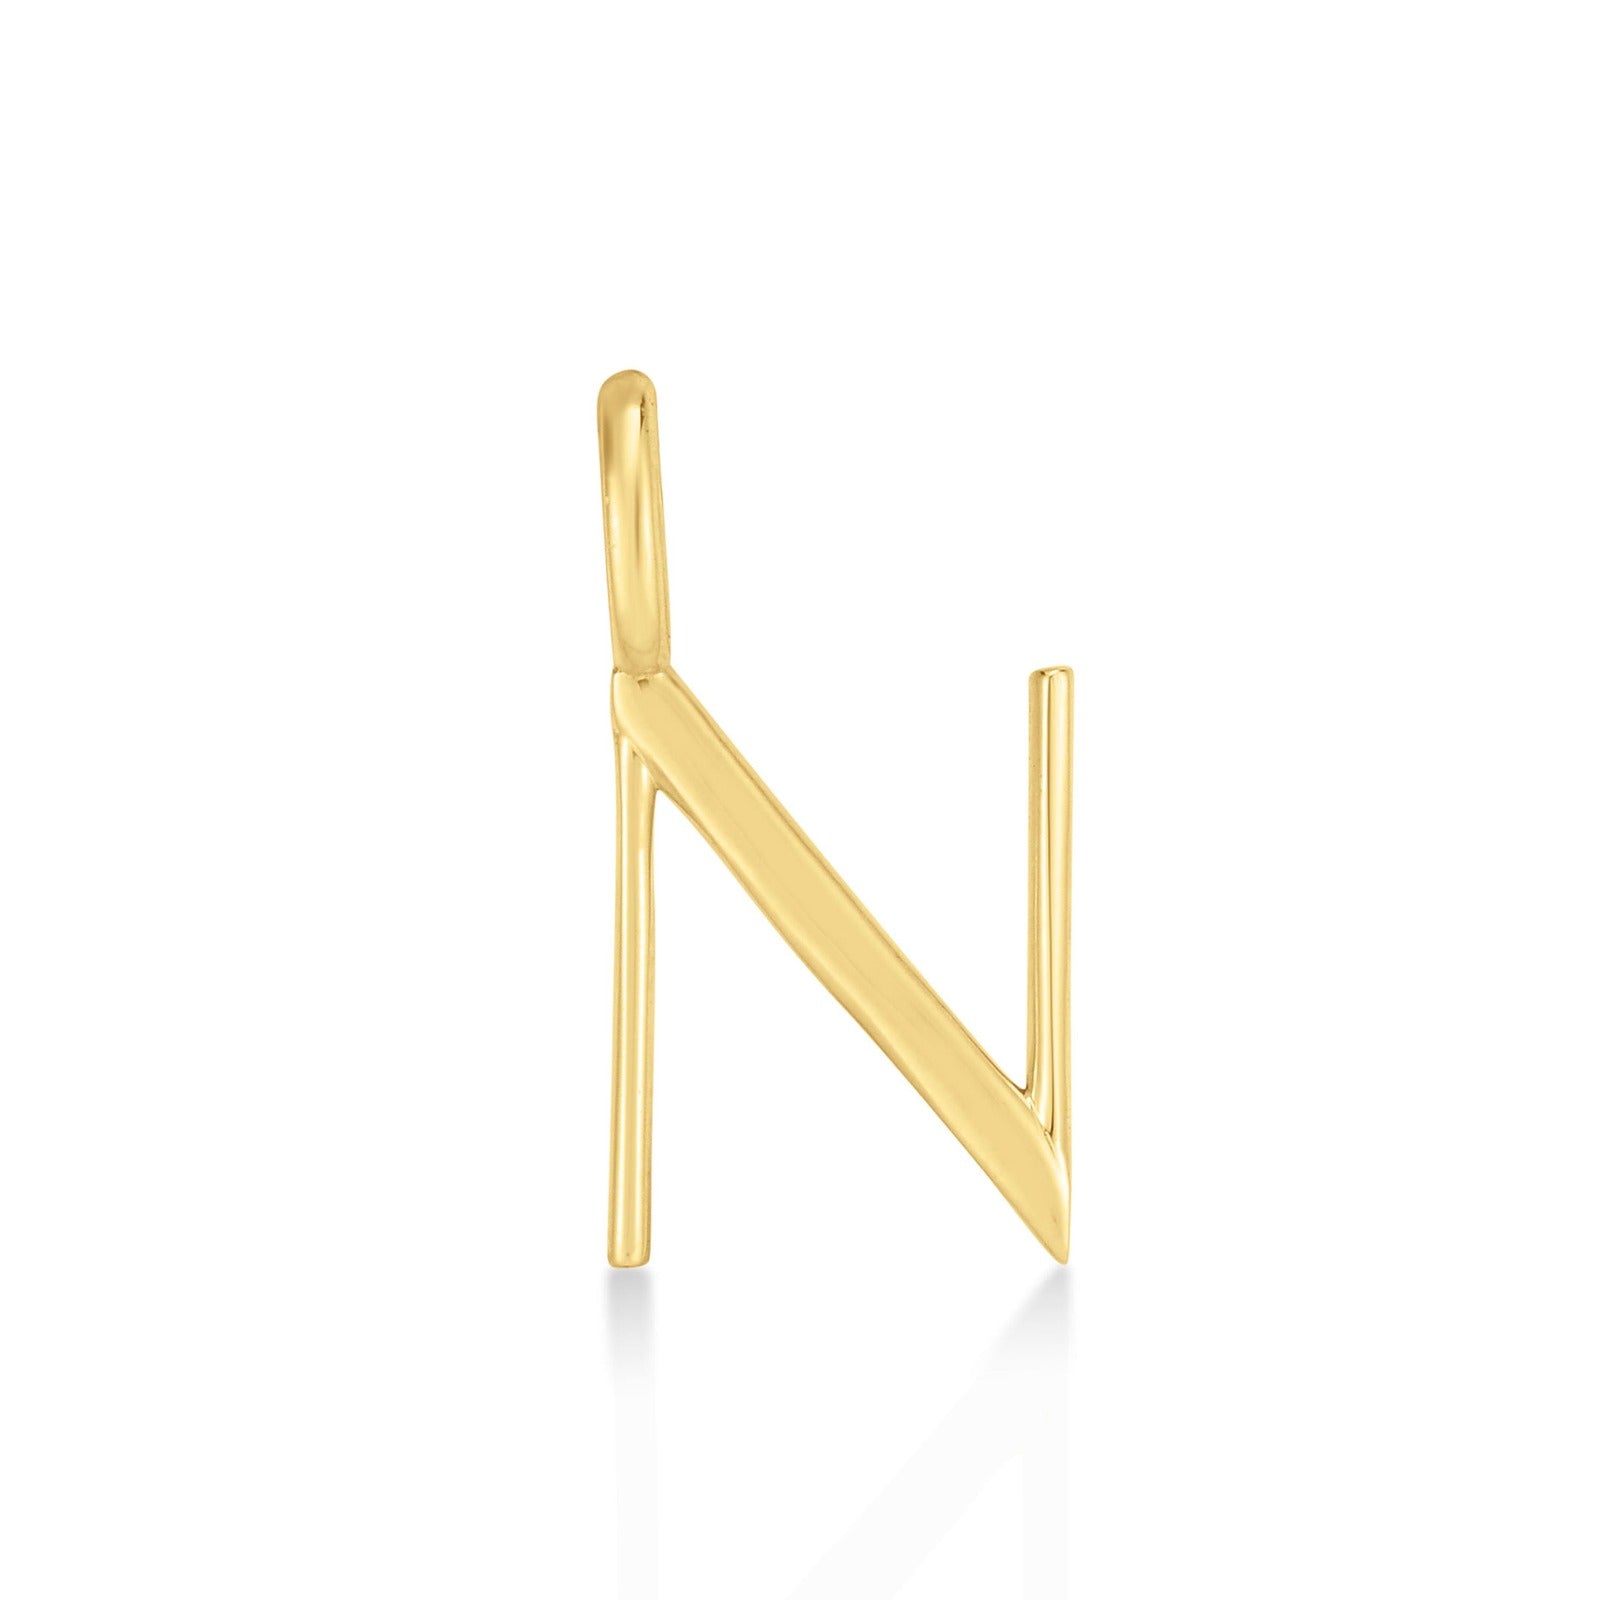 14K yellow gold N letter charm. 